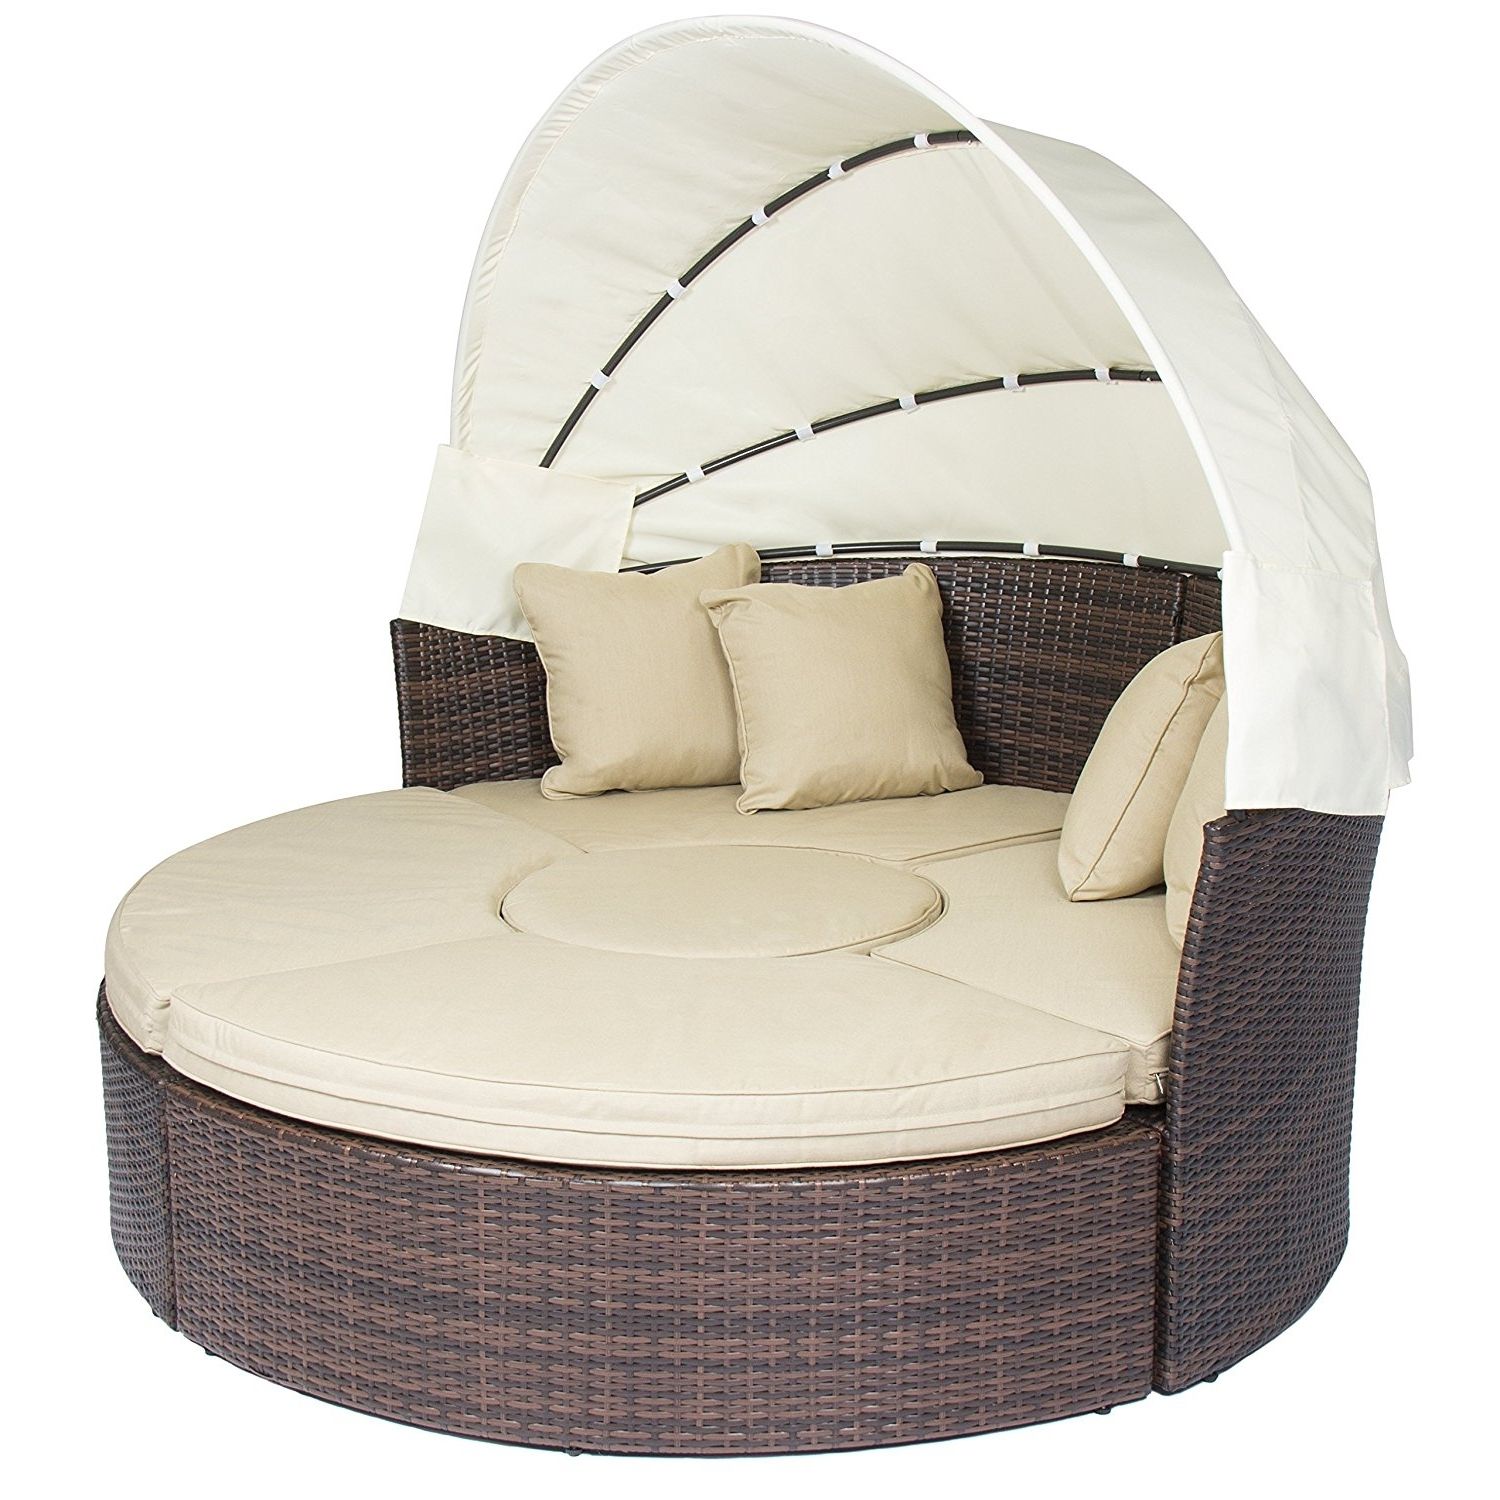 Most Current Sofa : Round Sofa Chair Australia Round Sofa Chair Nz Big Round Throughout Big Round Sofa Chairs (View 1 of 20)